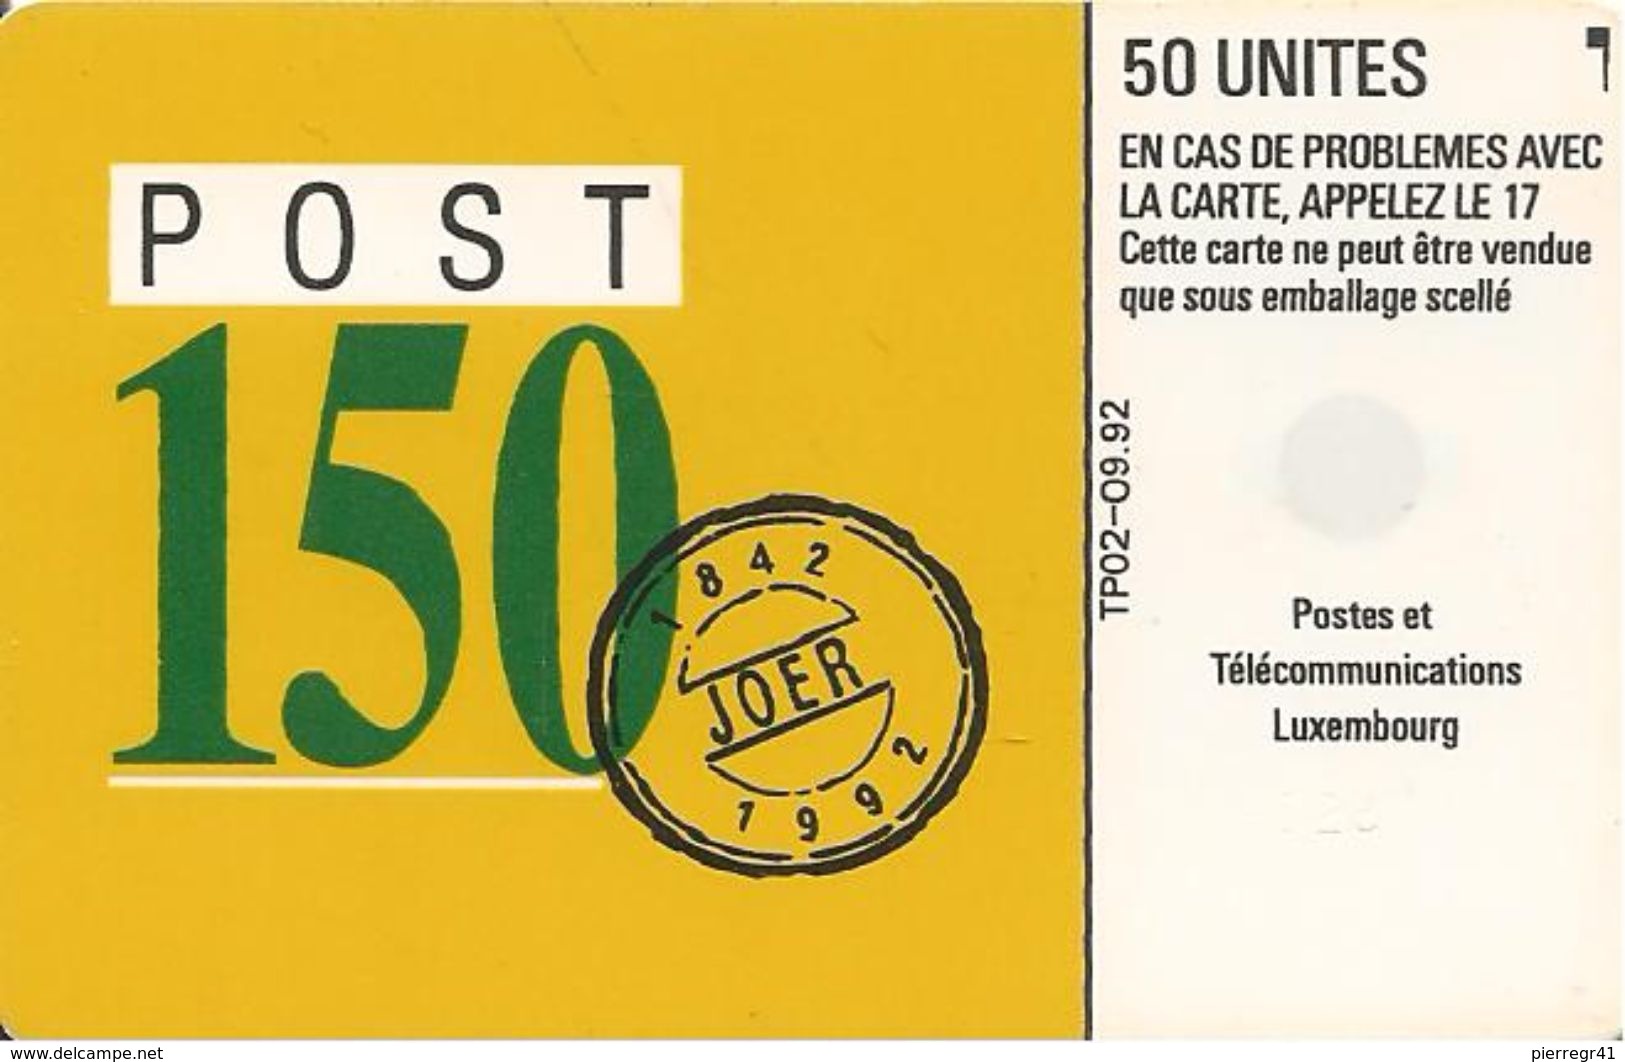 CARTEà-PUCE-LUXEMBOURG-50U-TP2B-SC5-09/92-POST 150 Ans-Le CAMION-V°5 Ge43284-TBE - Luxembourg